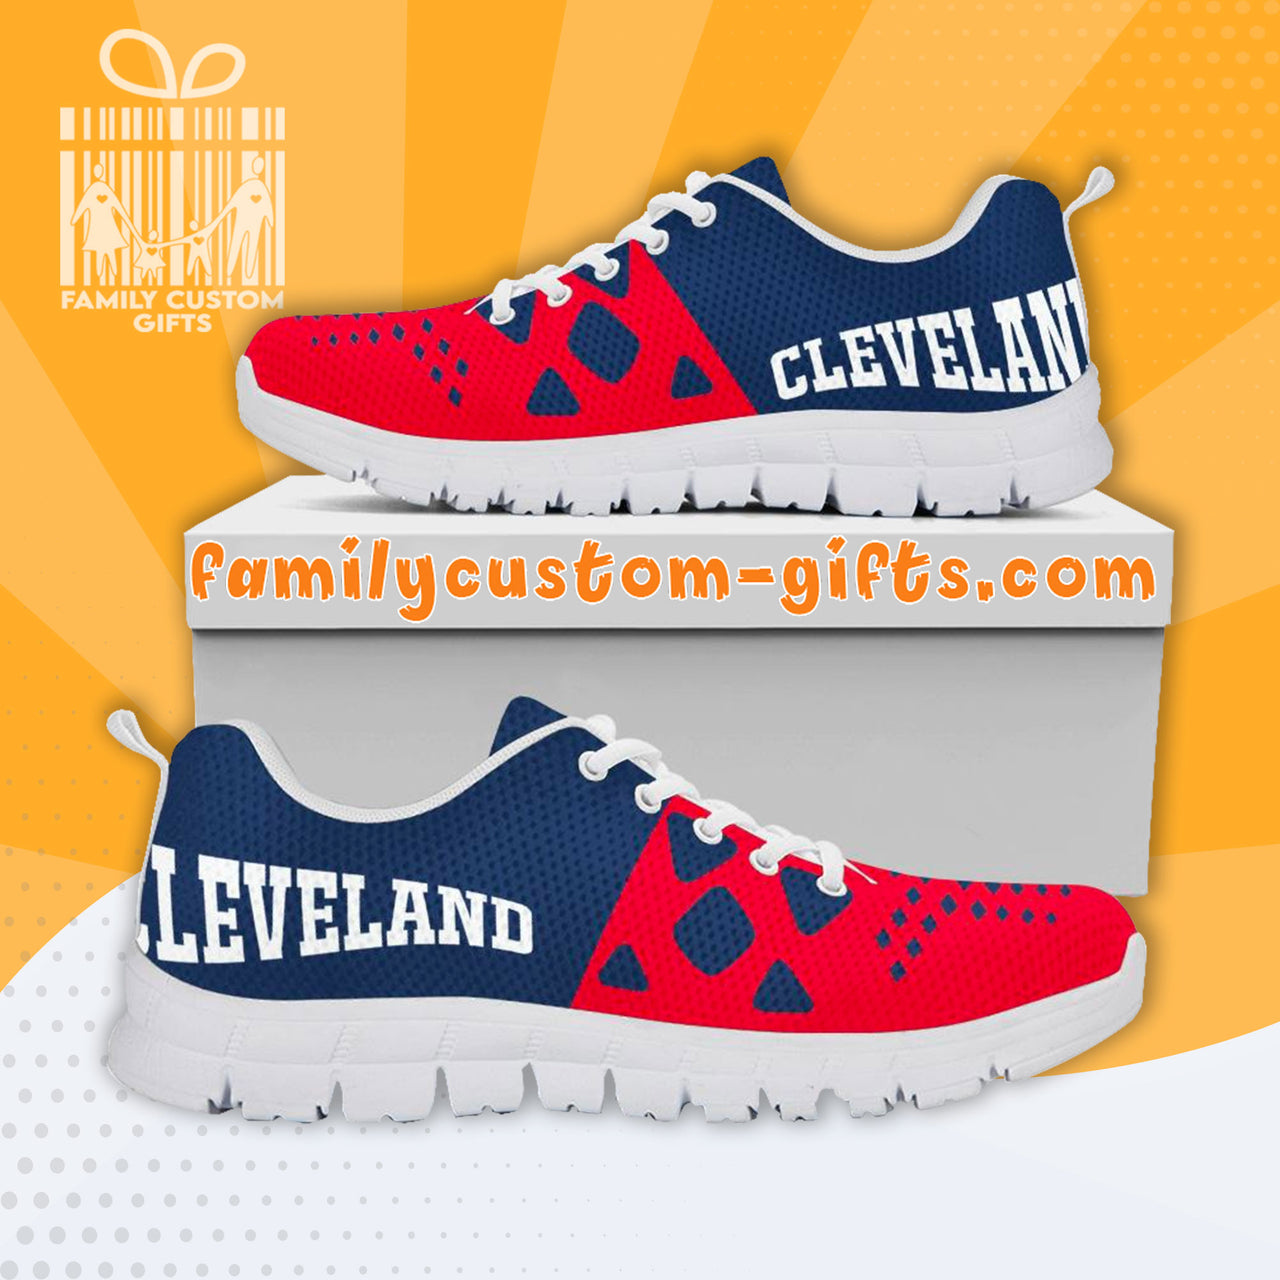 Cleveland Custom Shoes for Men Women 3D Print Fashion Sneaker Gifts for Her Him